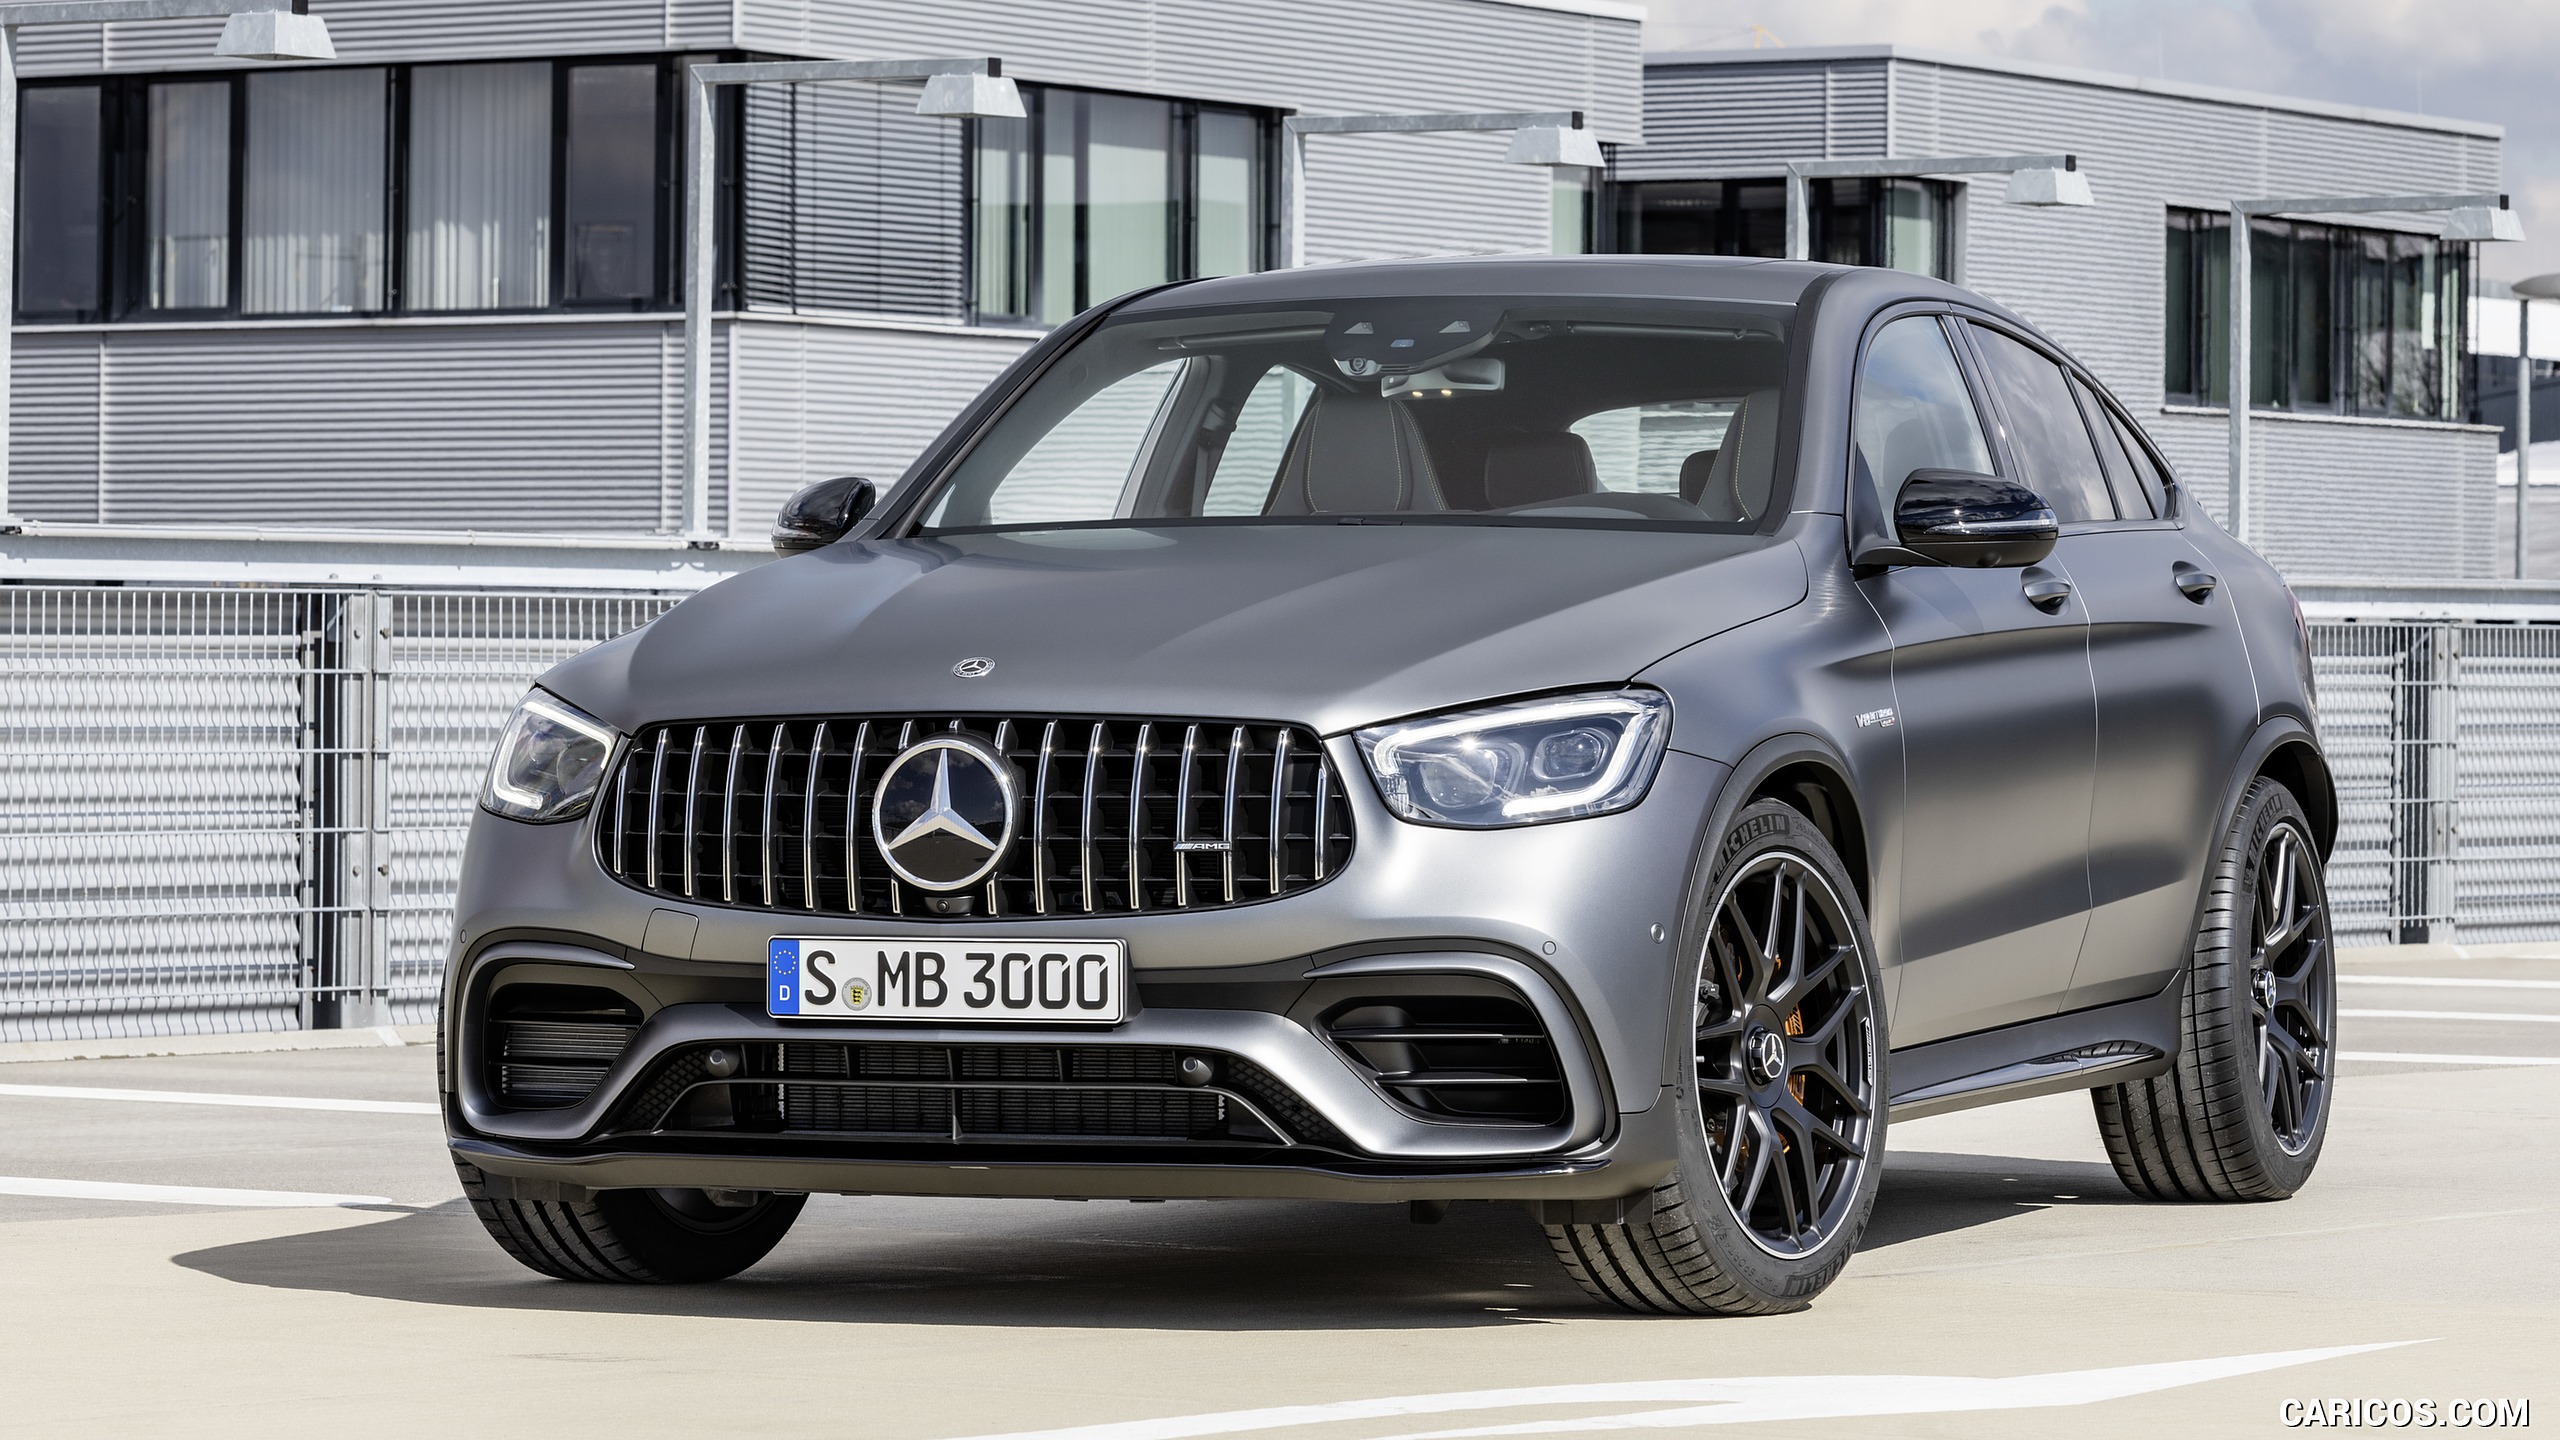 2020 Mercedes-AMG GLC 63 S 4MATIC+ Coupe - Front, #7 of 102